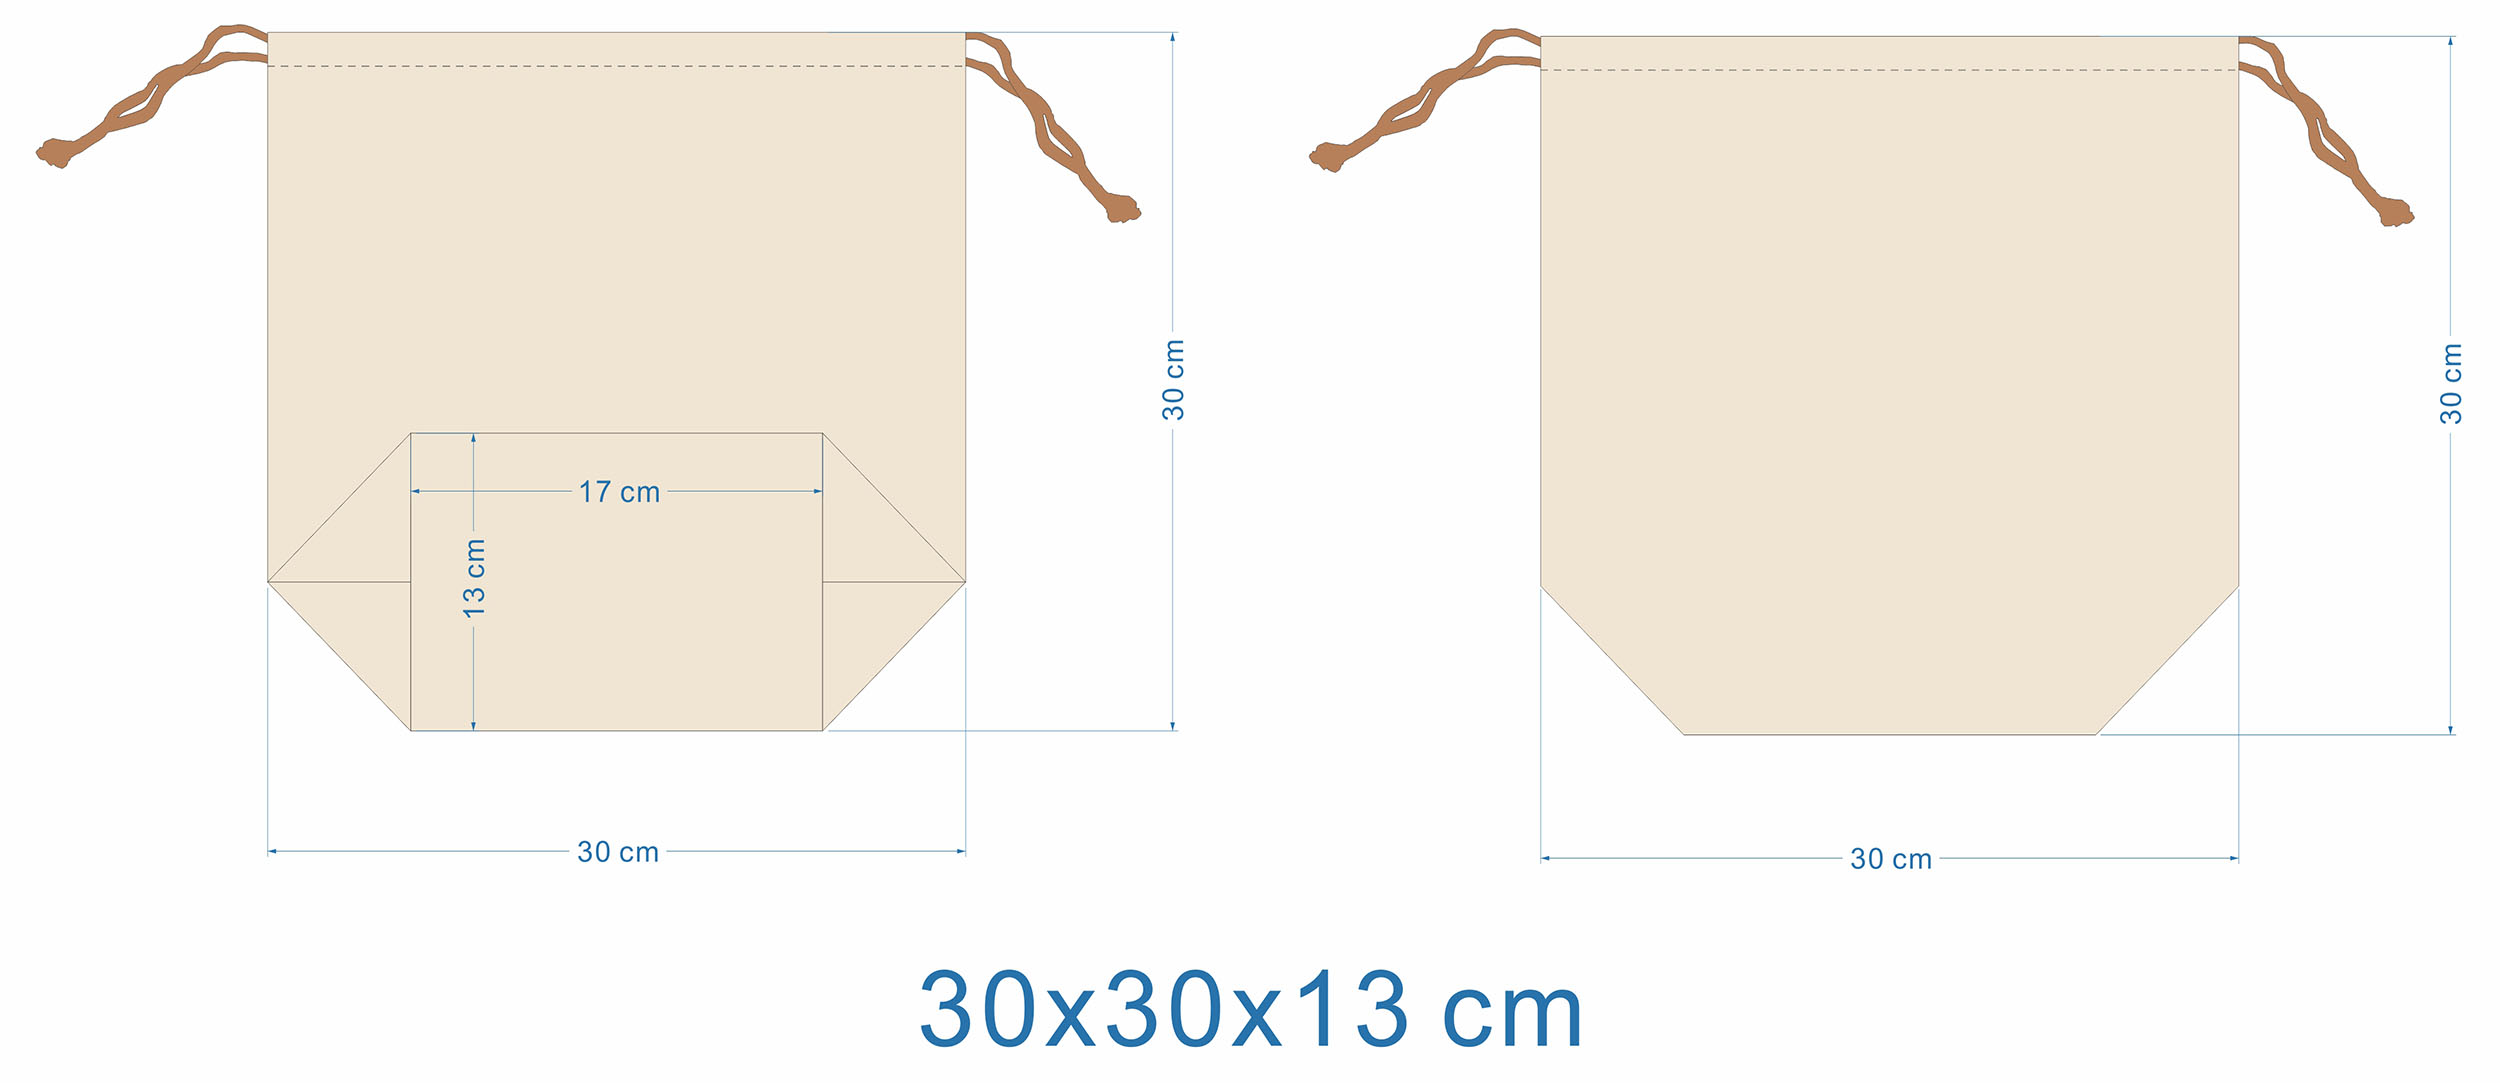 Technical drawing for large linen dust bag with bottom gusset